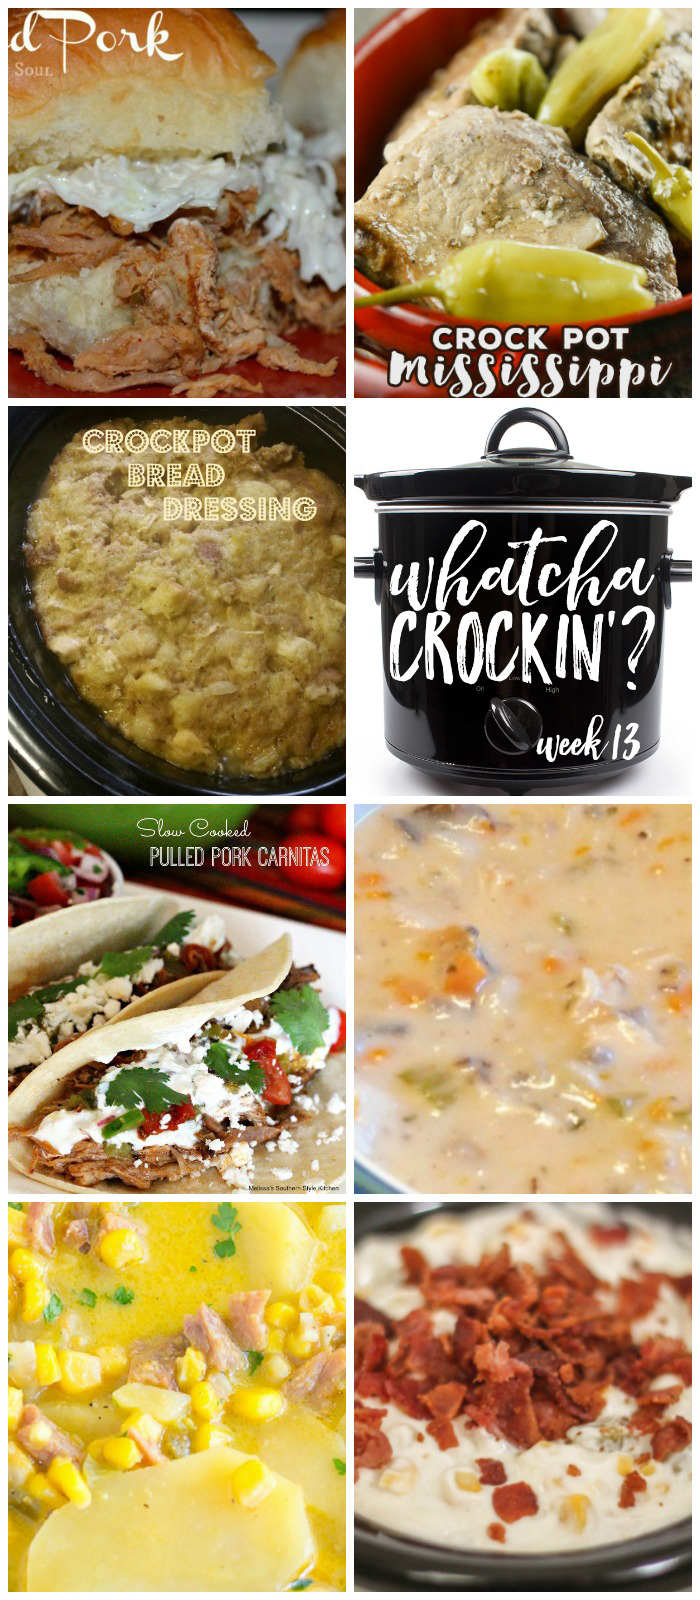 This week's Whatcha Crockin' crock pot recipes include Crock Pot Bread Dressing, Crock Pot Mississippi Pork Chops, Creamy Hot Bacon Corn Dip, Crock Pot Cheesy Ham Potato Soup, Crock Pot Pulled Pork, Slow Cooked Pulled Pork Carnitas, Crock Pot Creamy Chicken and Wild Rice Soup and much more!